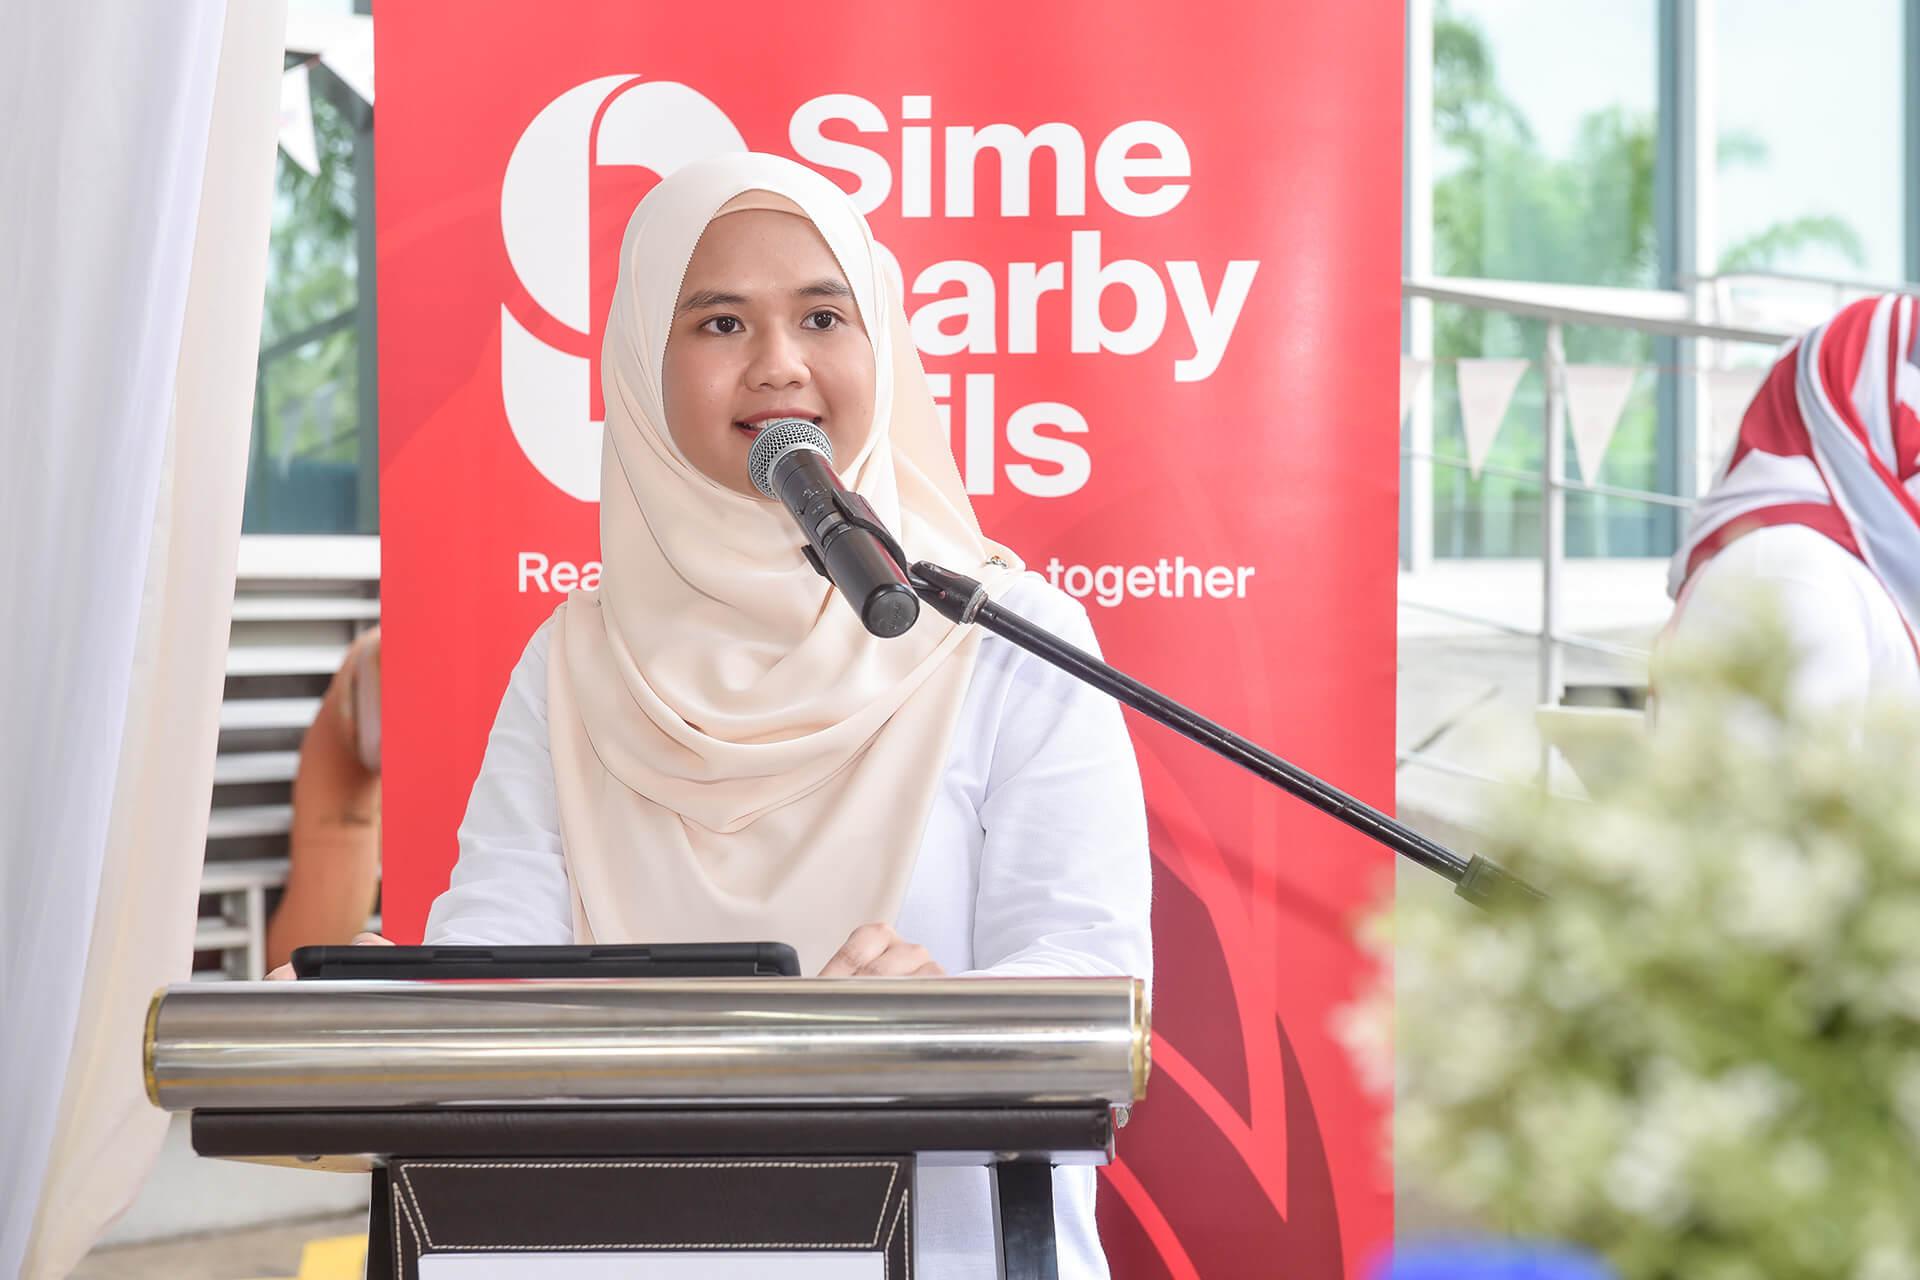 Sime Darby Oils - Used Cooking Oils Programme